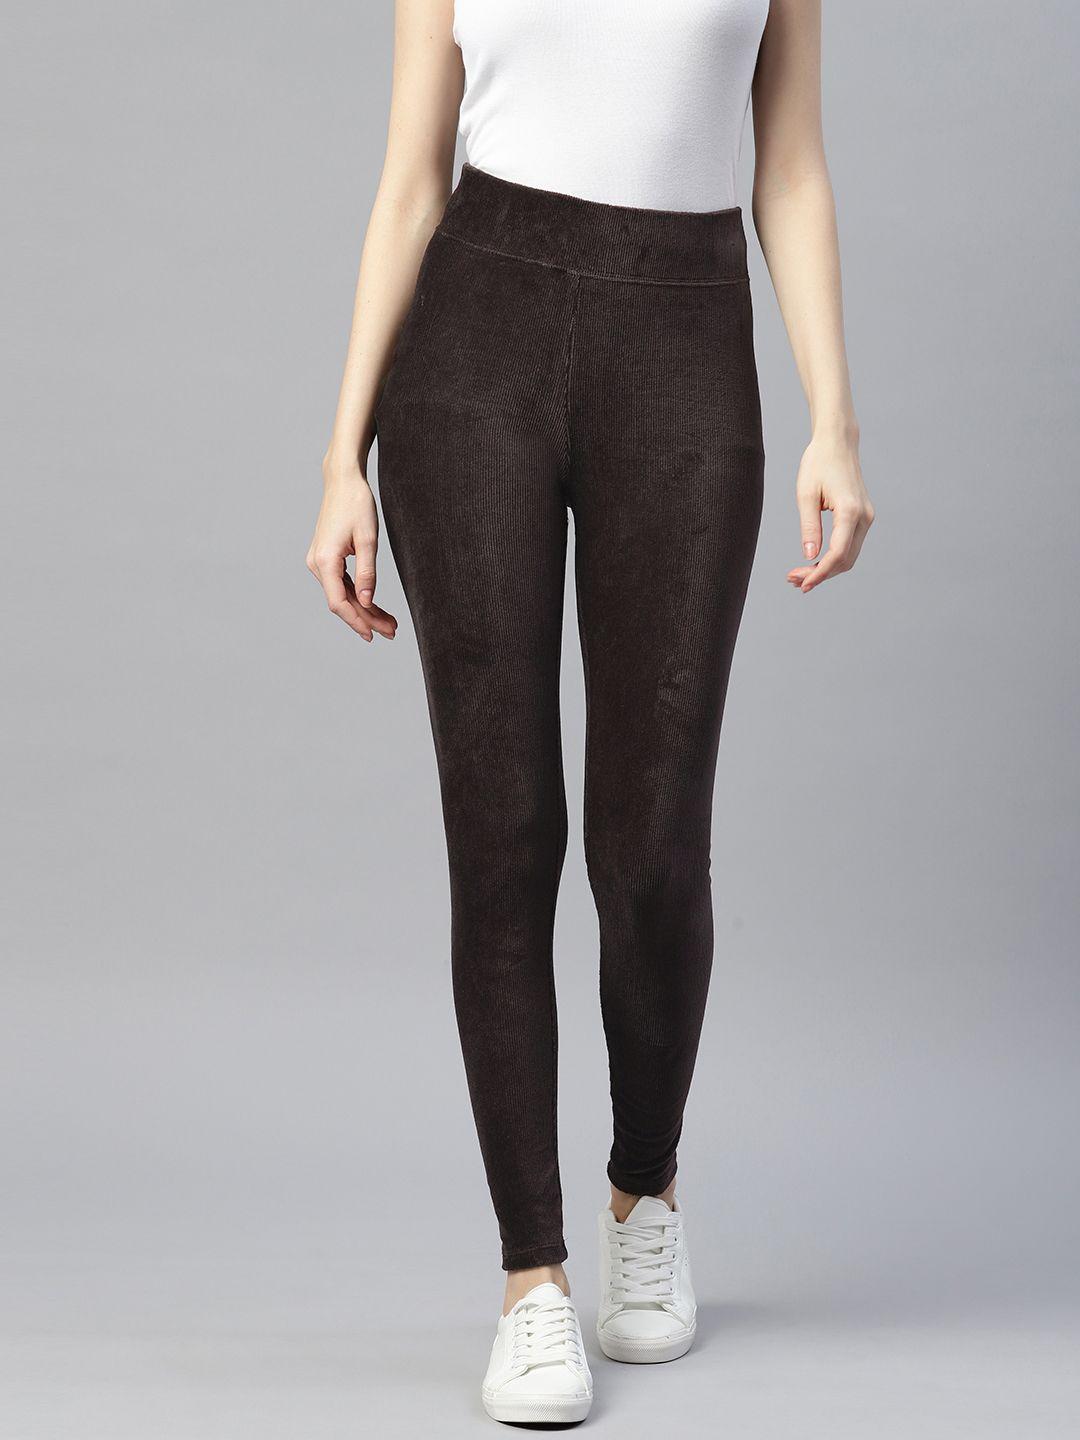 marks-&-spencer-women-solid-knitted--corduroy-jeggings